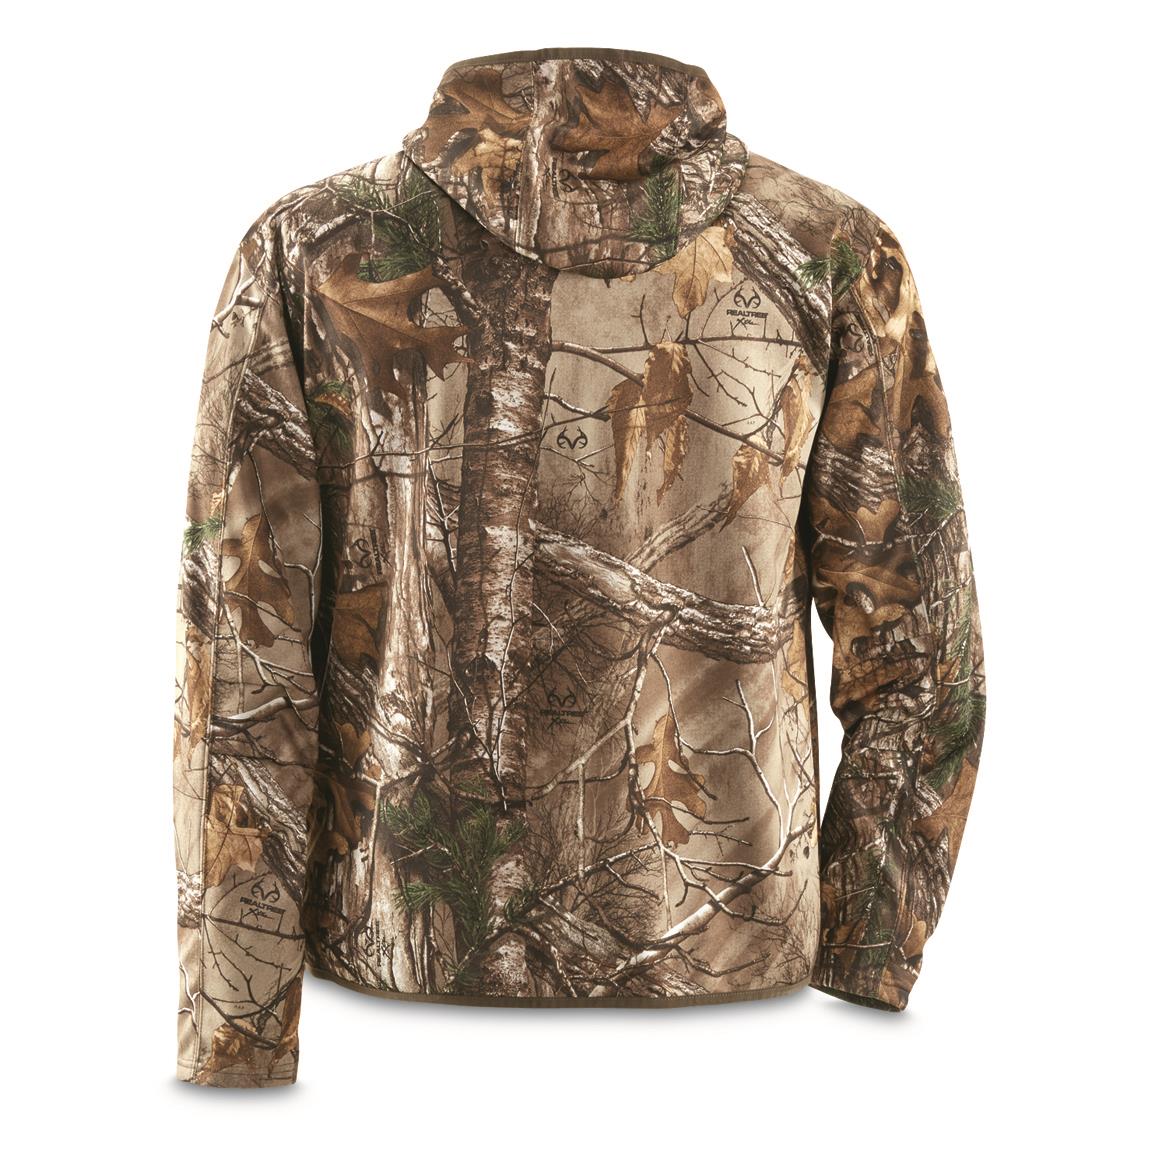 Men's Hunting Clothing & Camo Clothes | Sportsman's Guide